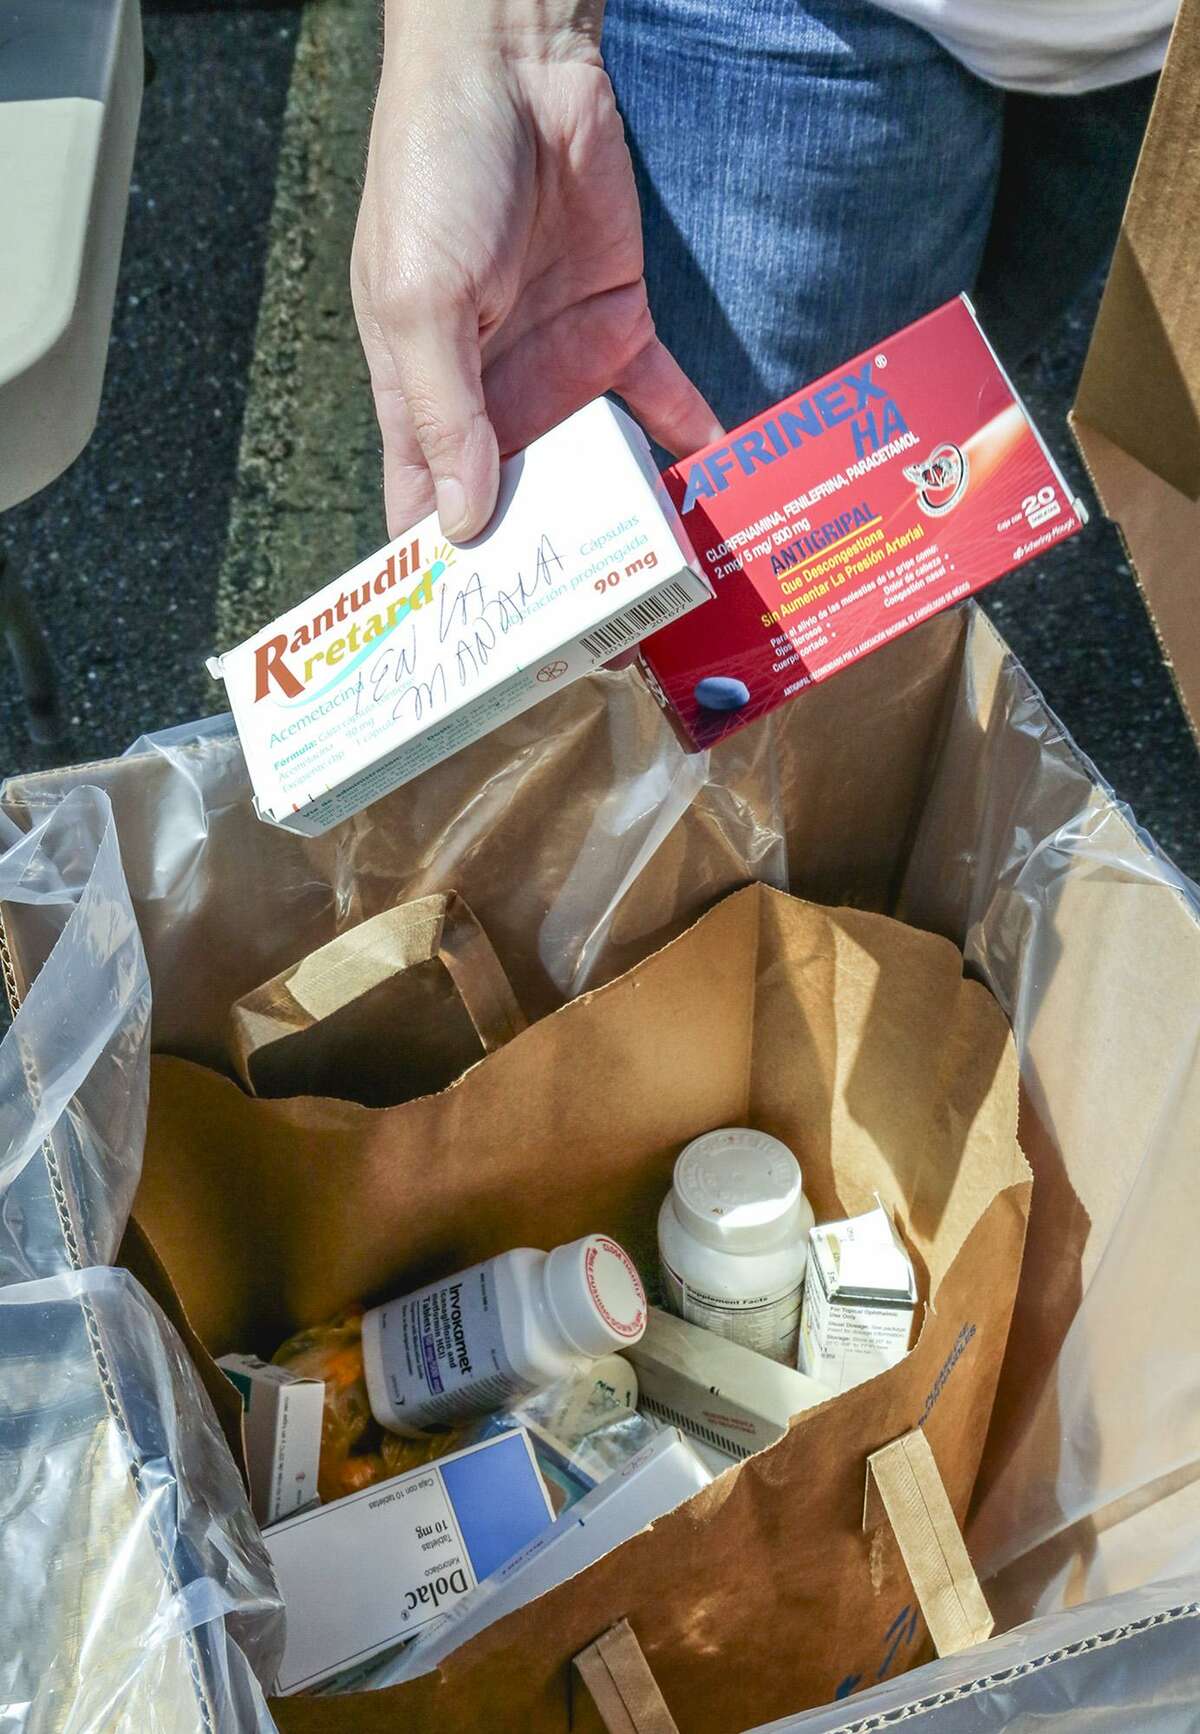 Prescription medication collected by the U.S. Drug Enforcement Administration is seen in a container before being sealed away for proper disposal, Saturday morning during National Drug Take Back Day.